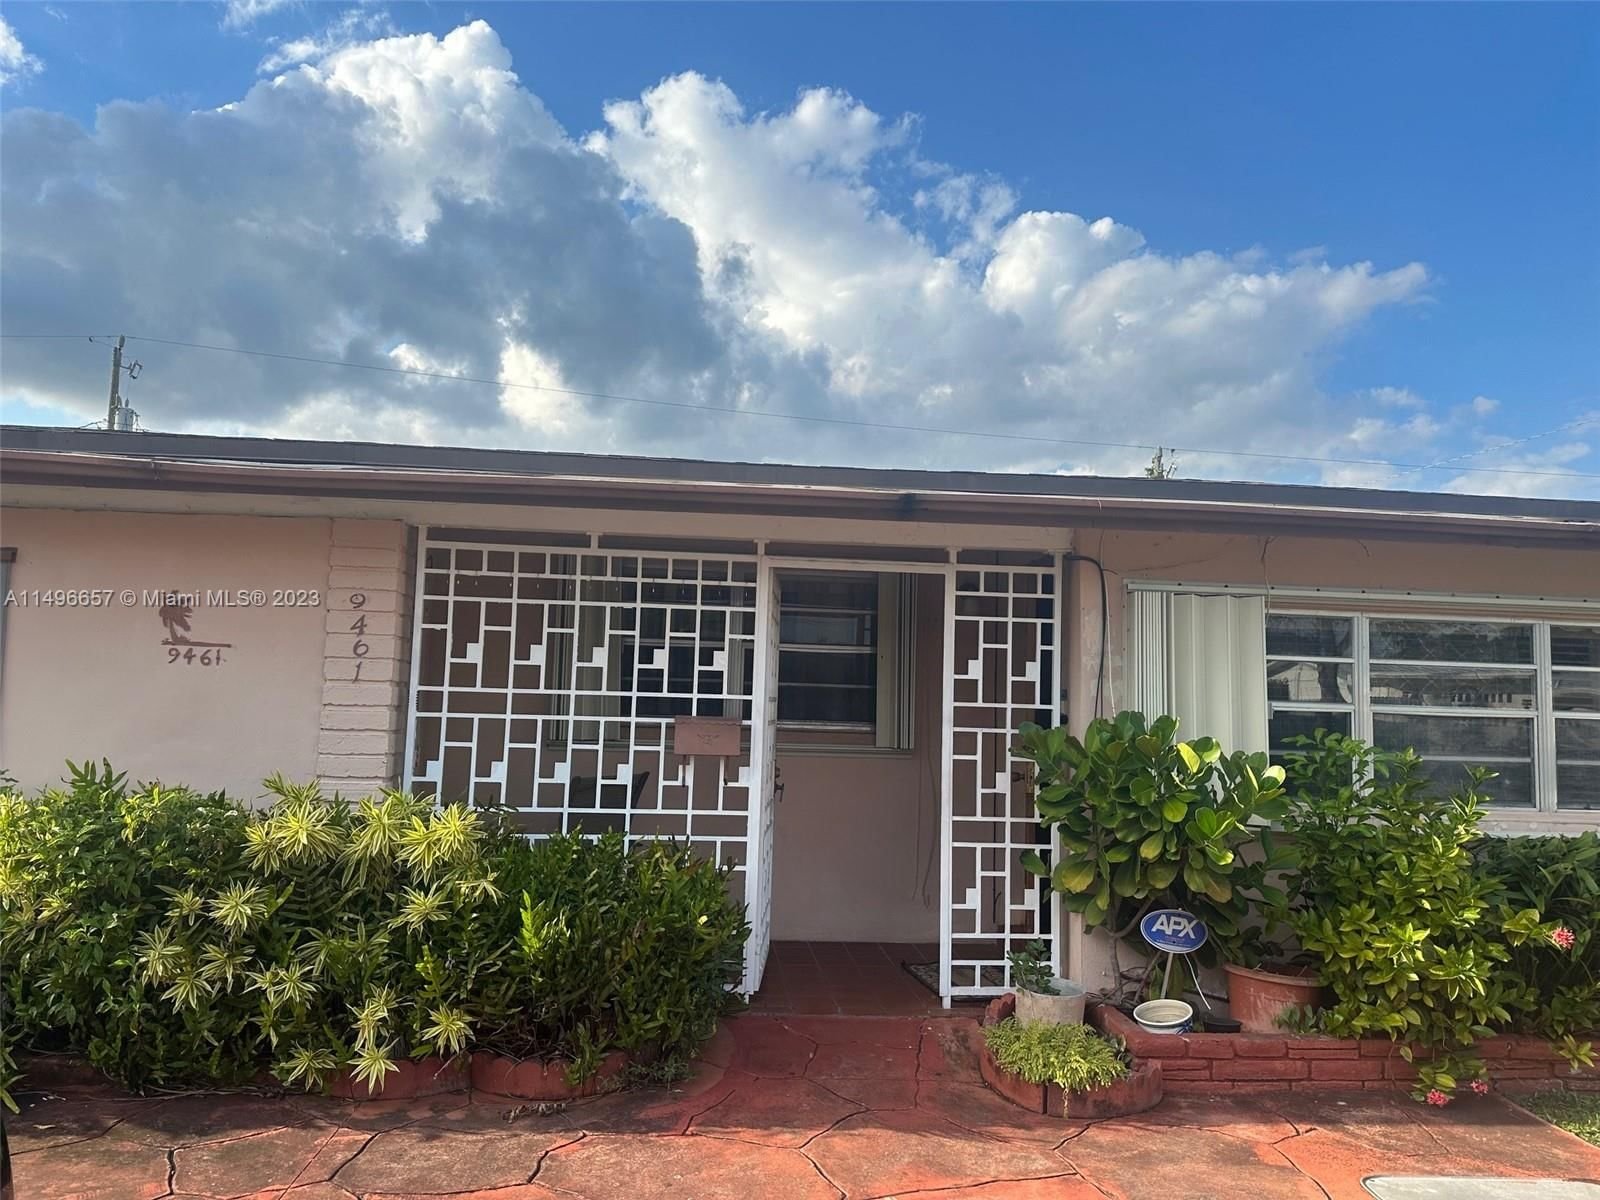 Real estate property located at 9461 Jamaica Dr, Miami-Dade County, SOUTH CORAL HOMES SEC 2, Cutler Bay, FL